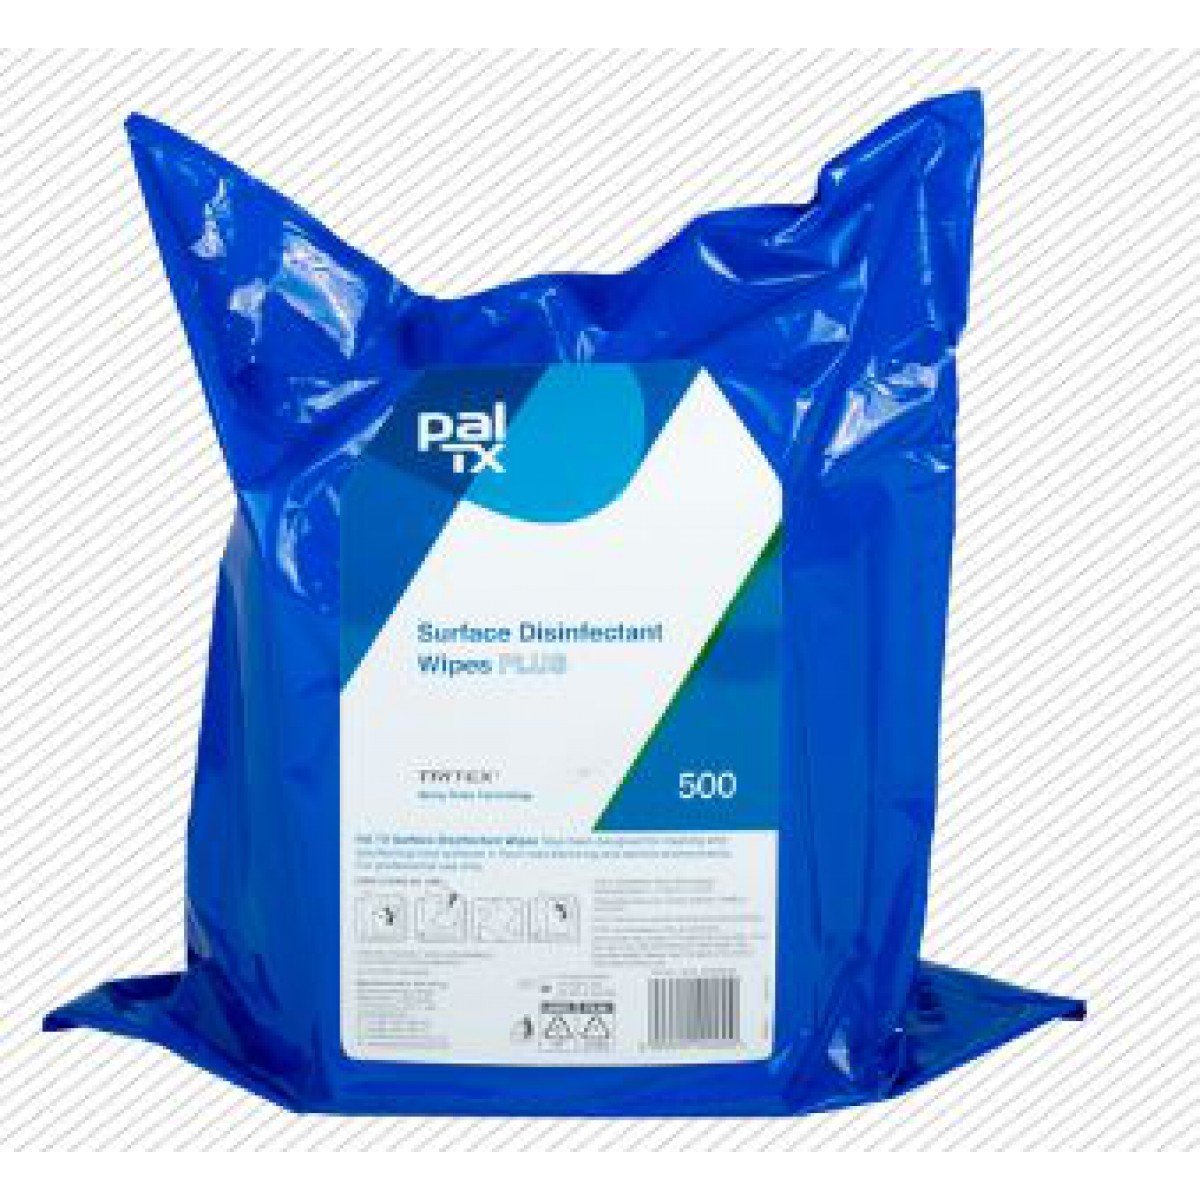 Pal TX Surface Disinfectant Wipes Refill